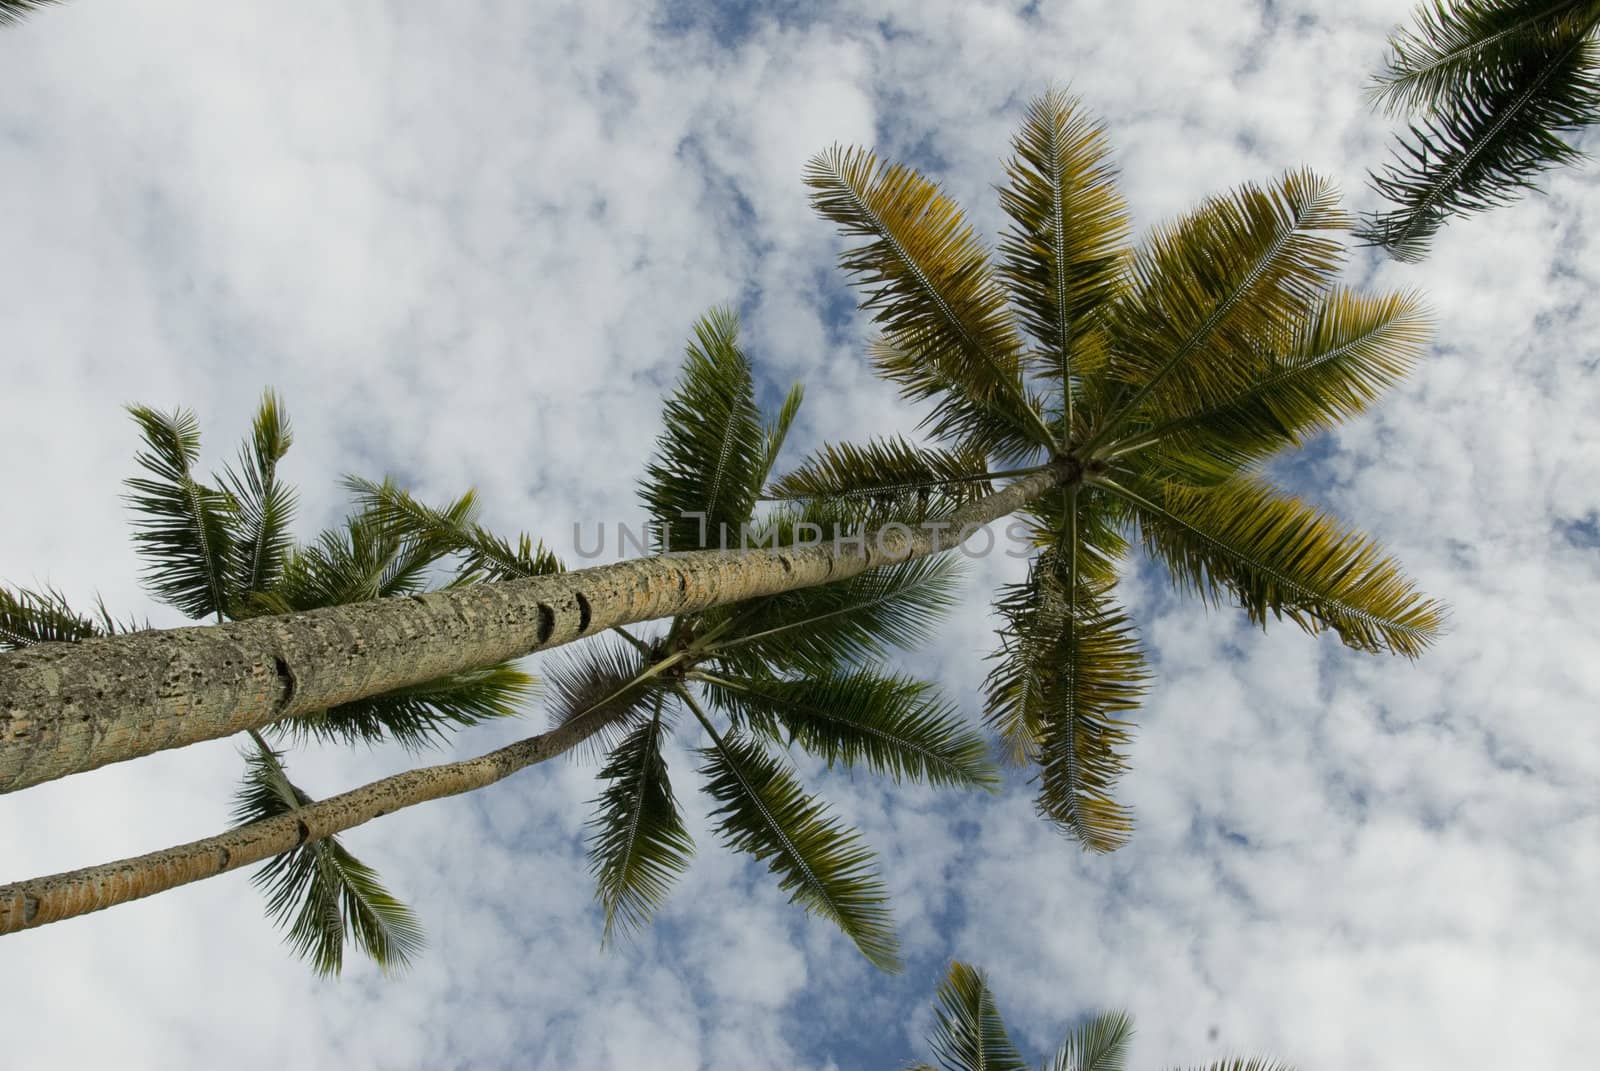 Upward view of multiple tropical palm trees